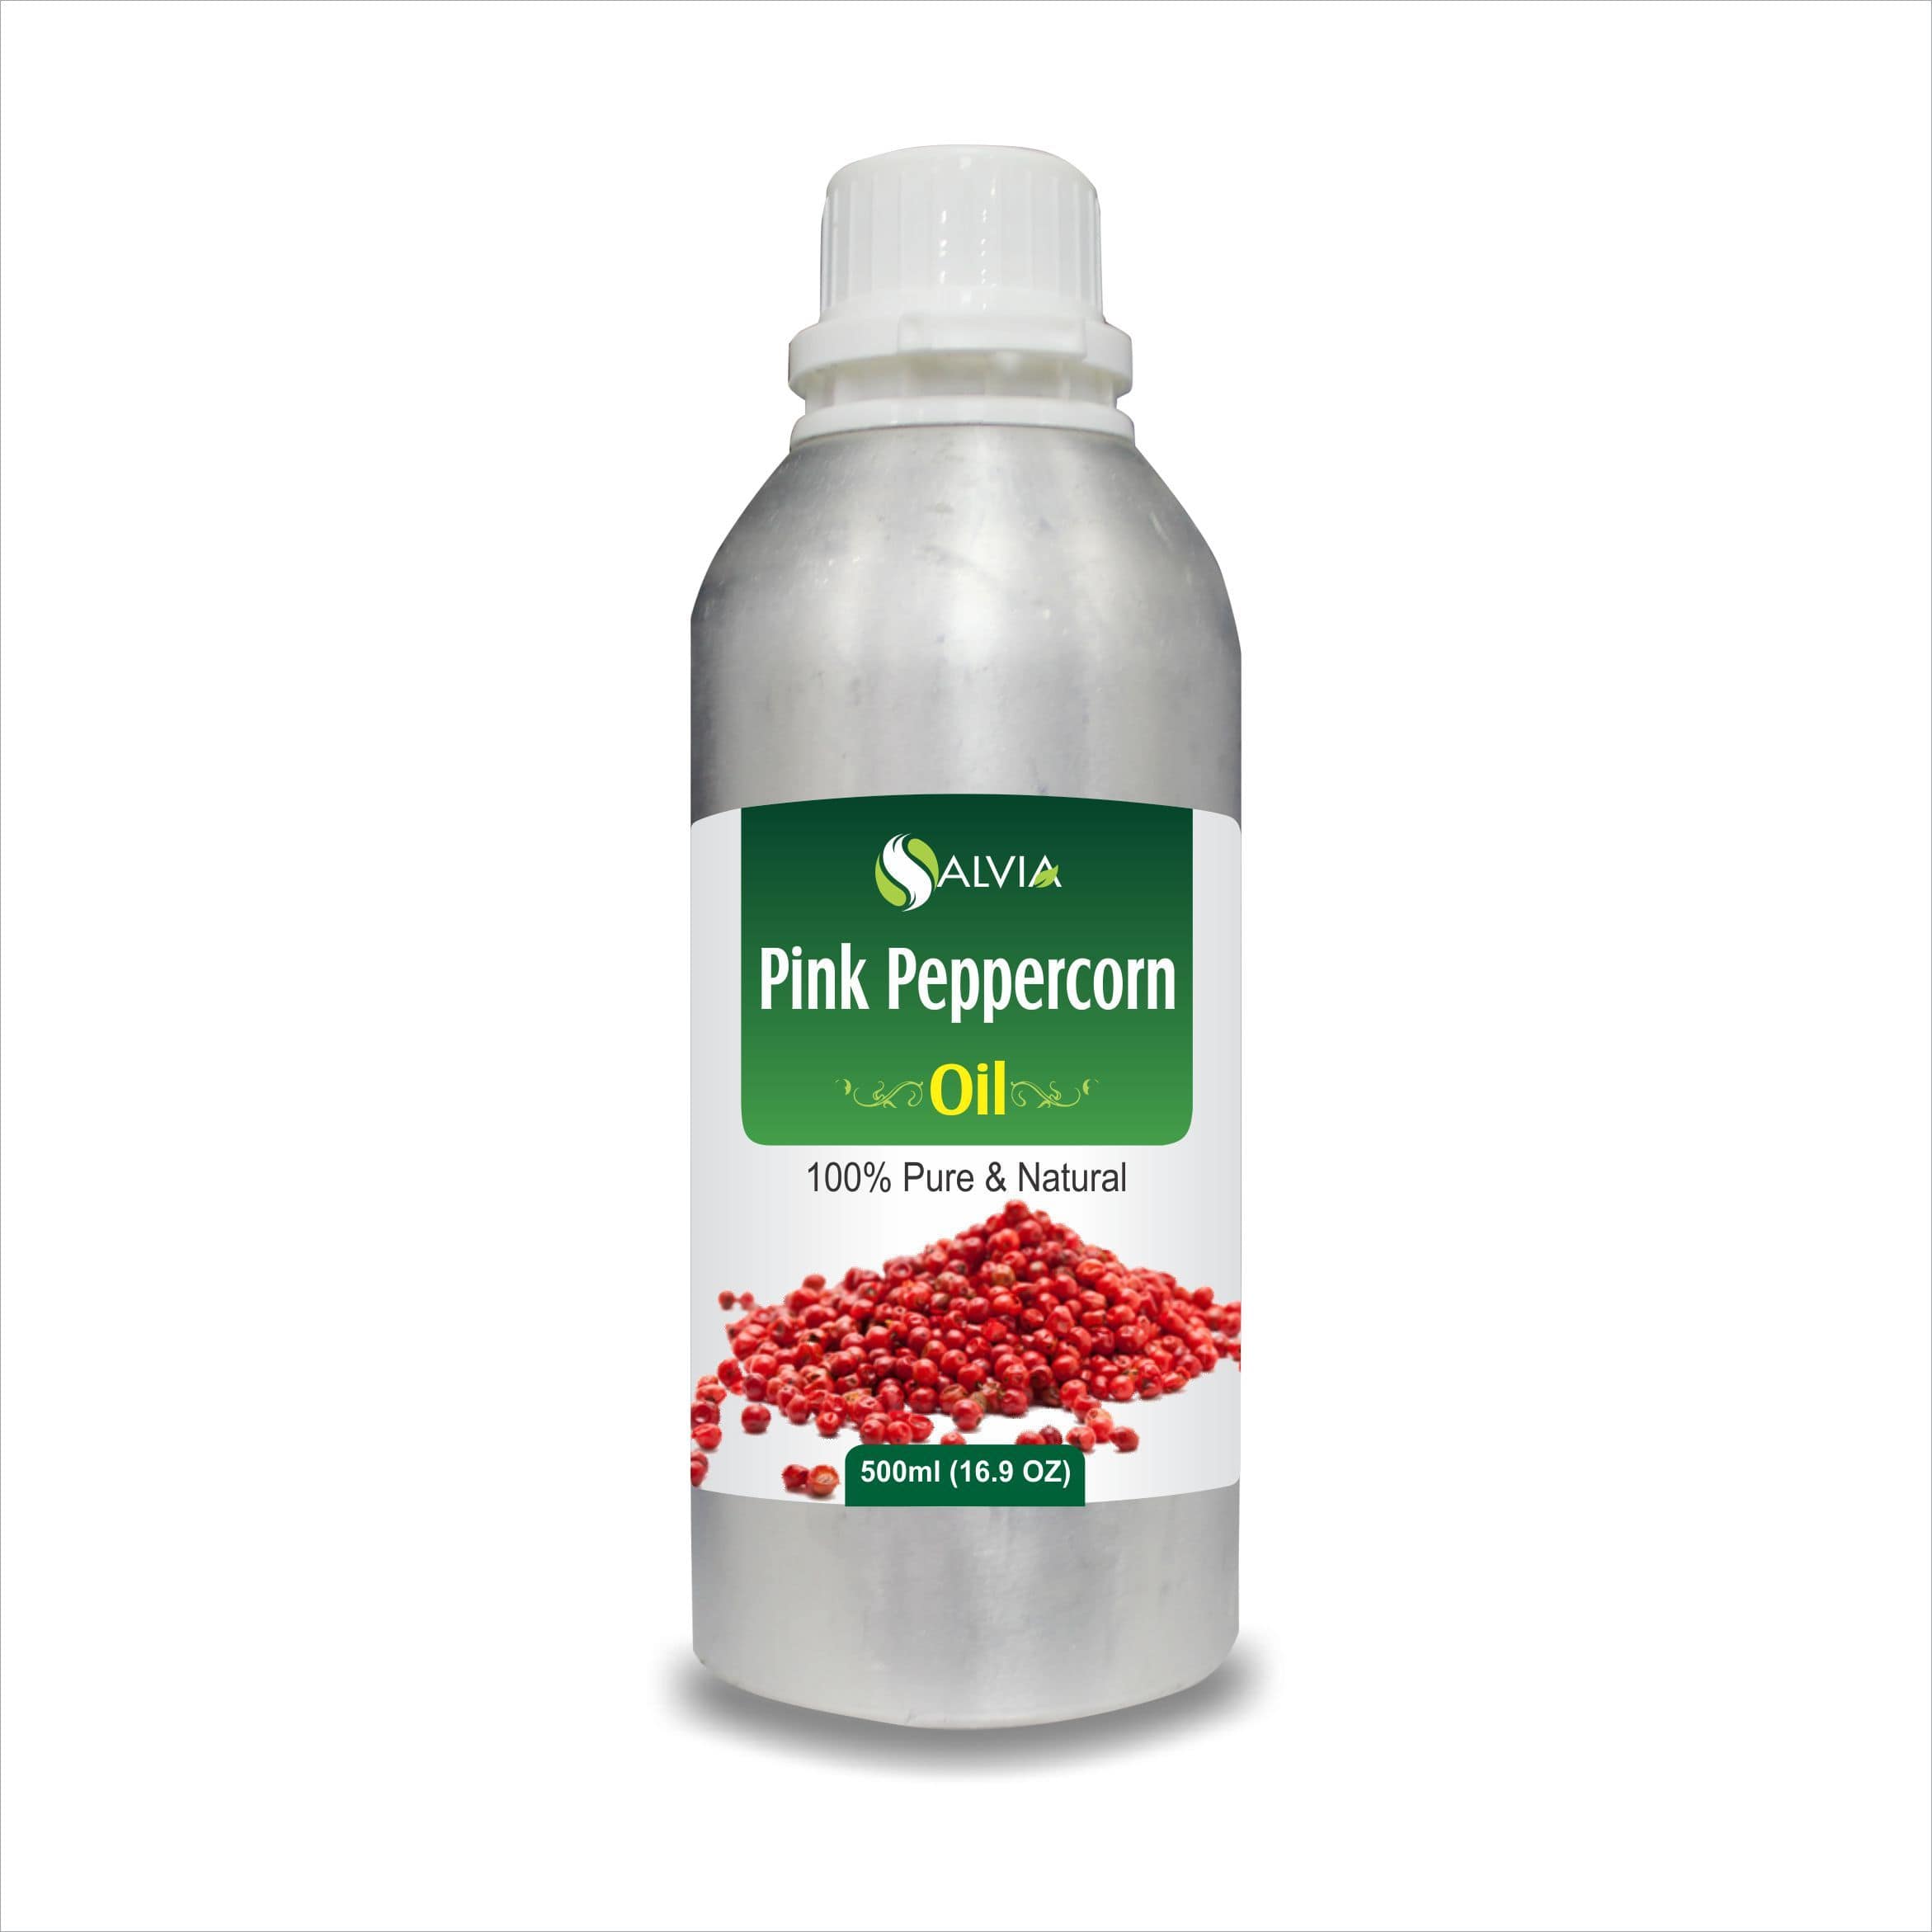 pink pepper uses